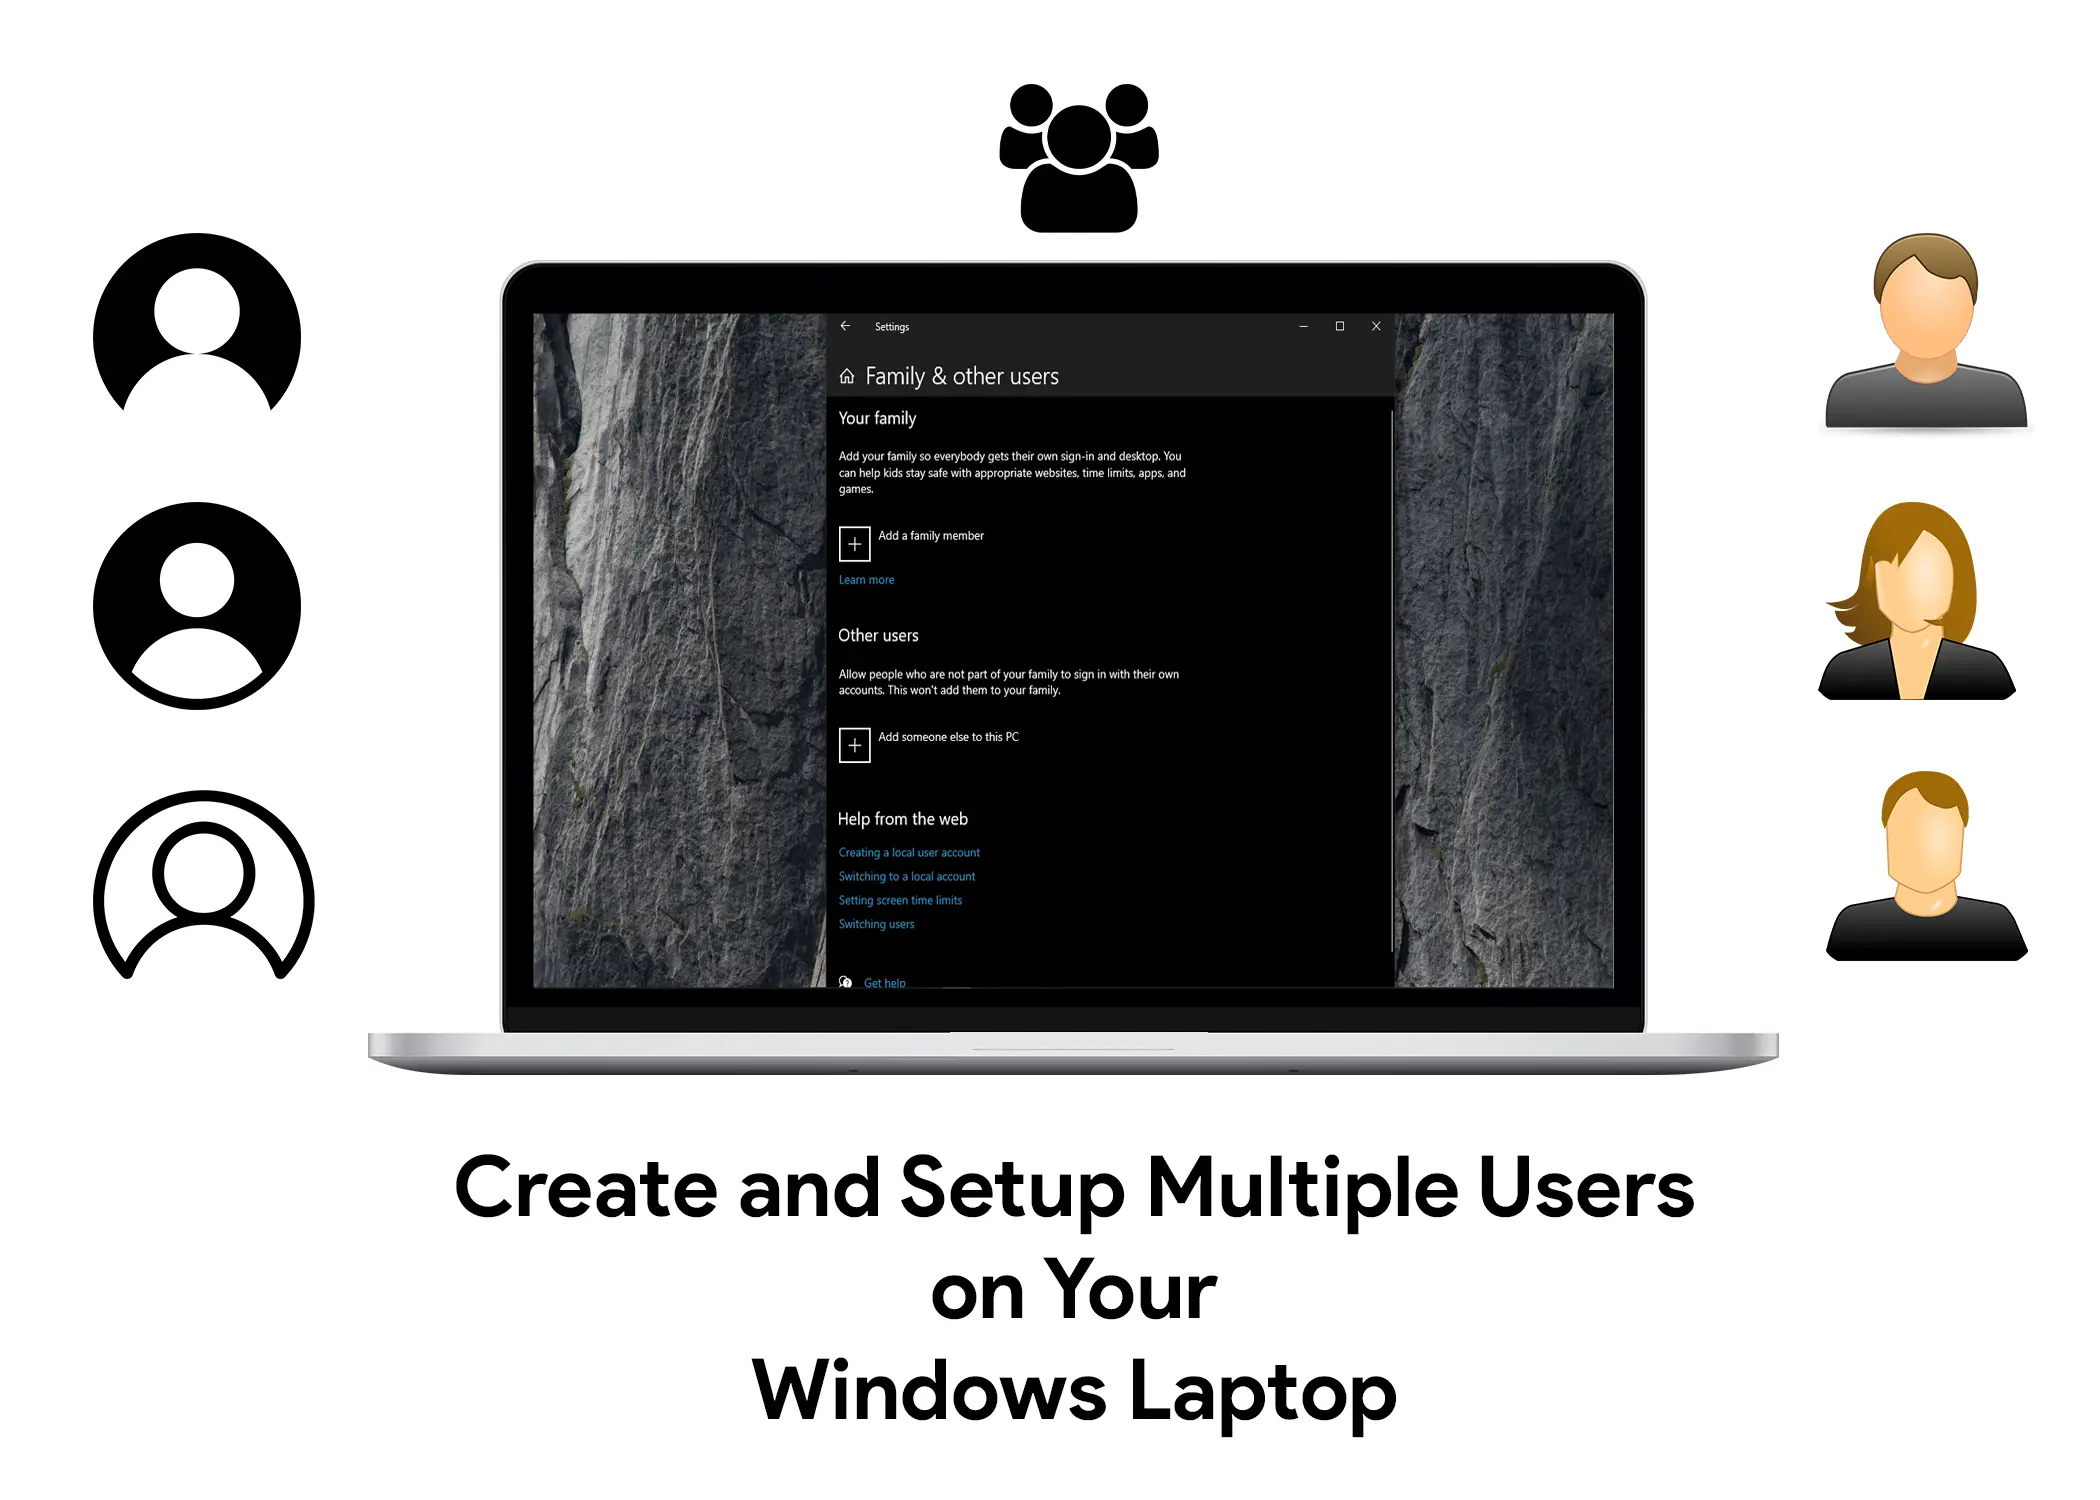 How to Create and Setup Multiple Users on Your Windows Laptop